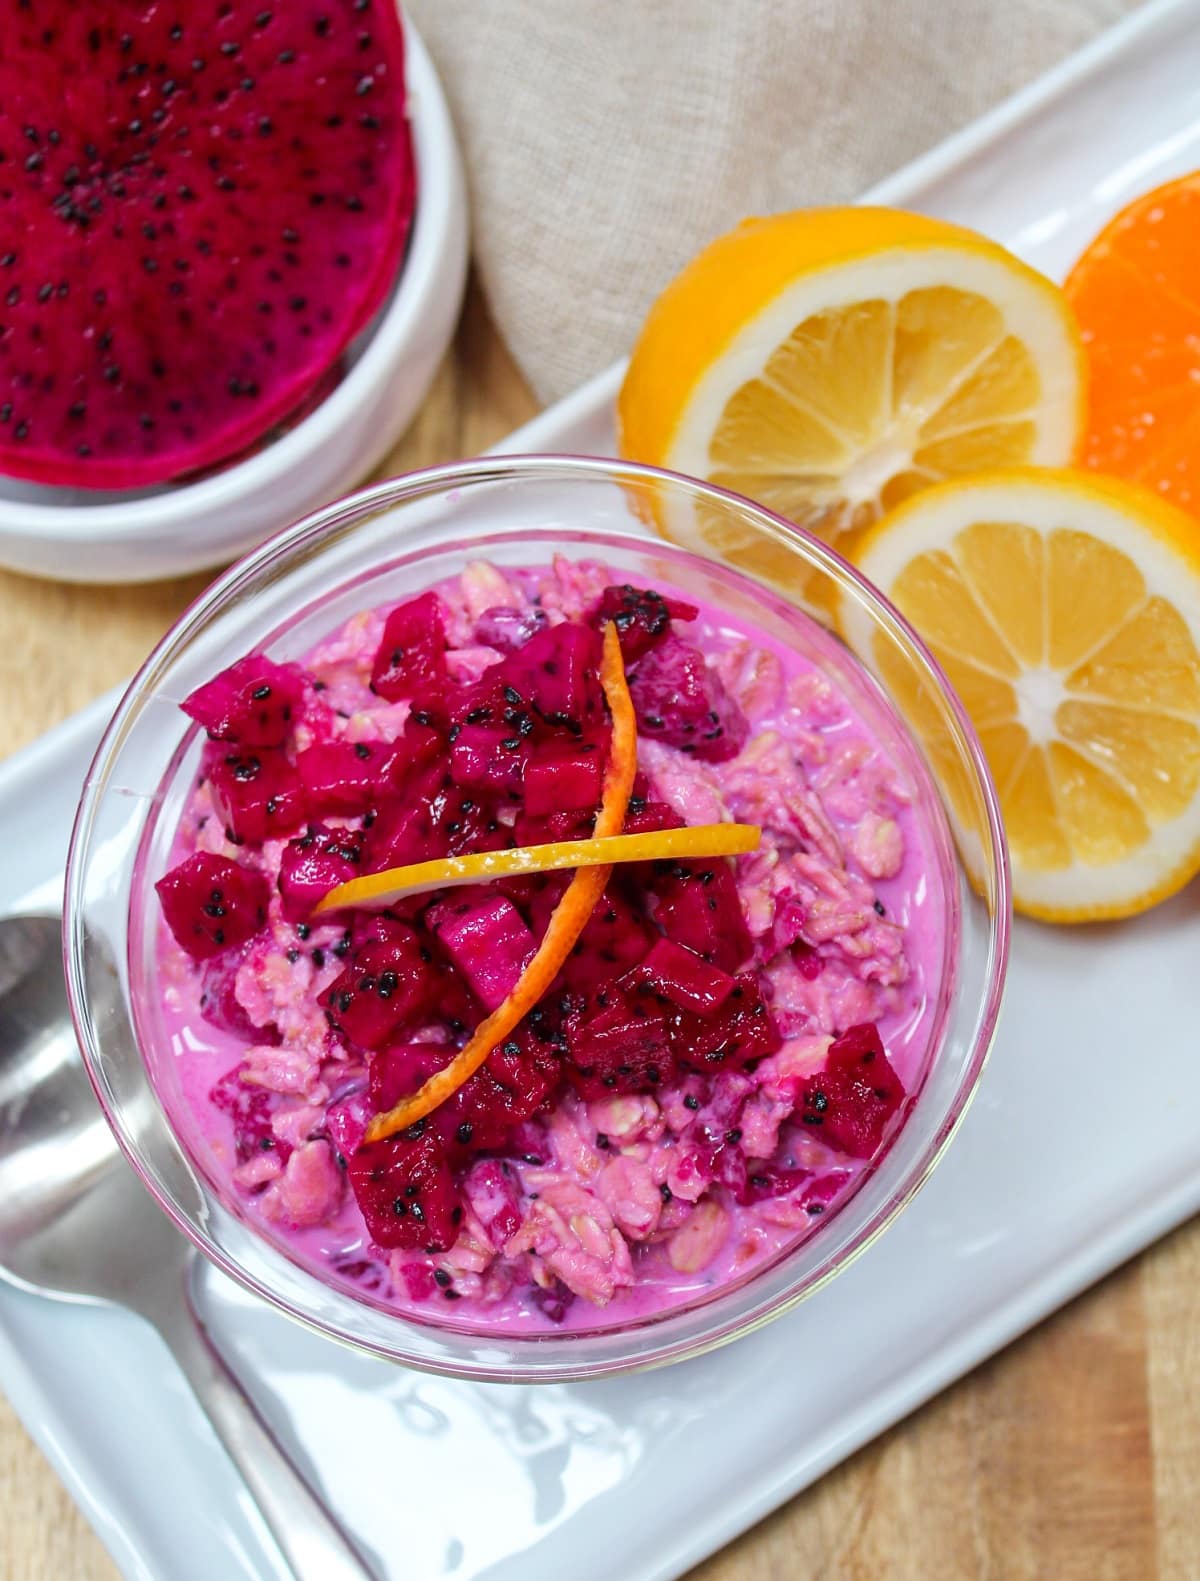 Pink overnight oats topped with chopped dragon fruit and citrus zest in a glass bowl.